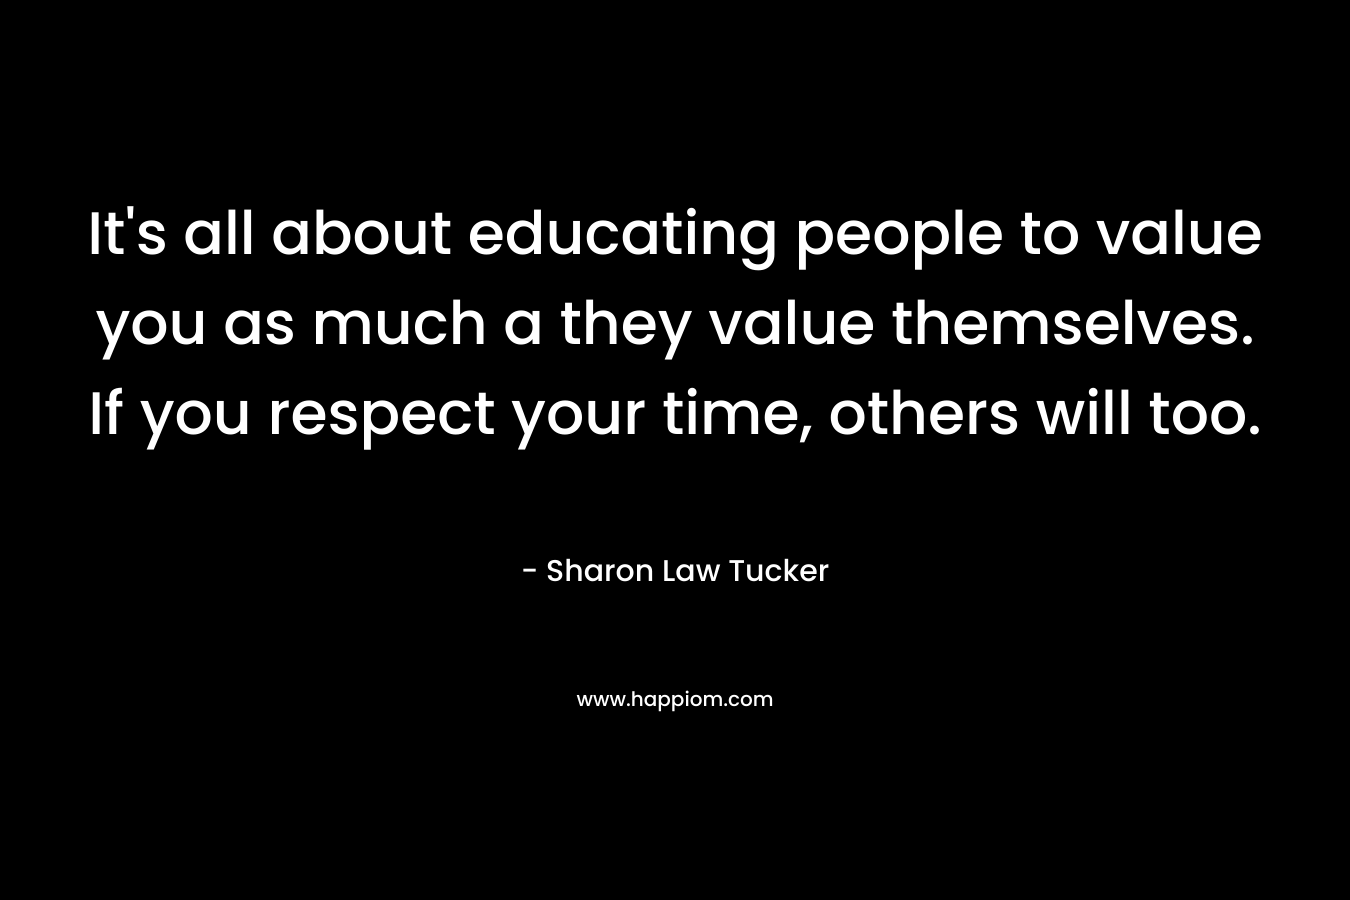 It's all about educating people to value you as much a they value themselves. If you respect your time, others will too.